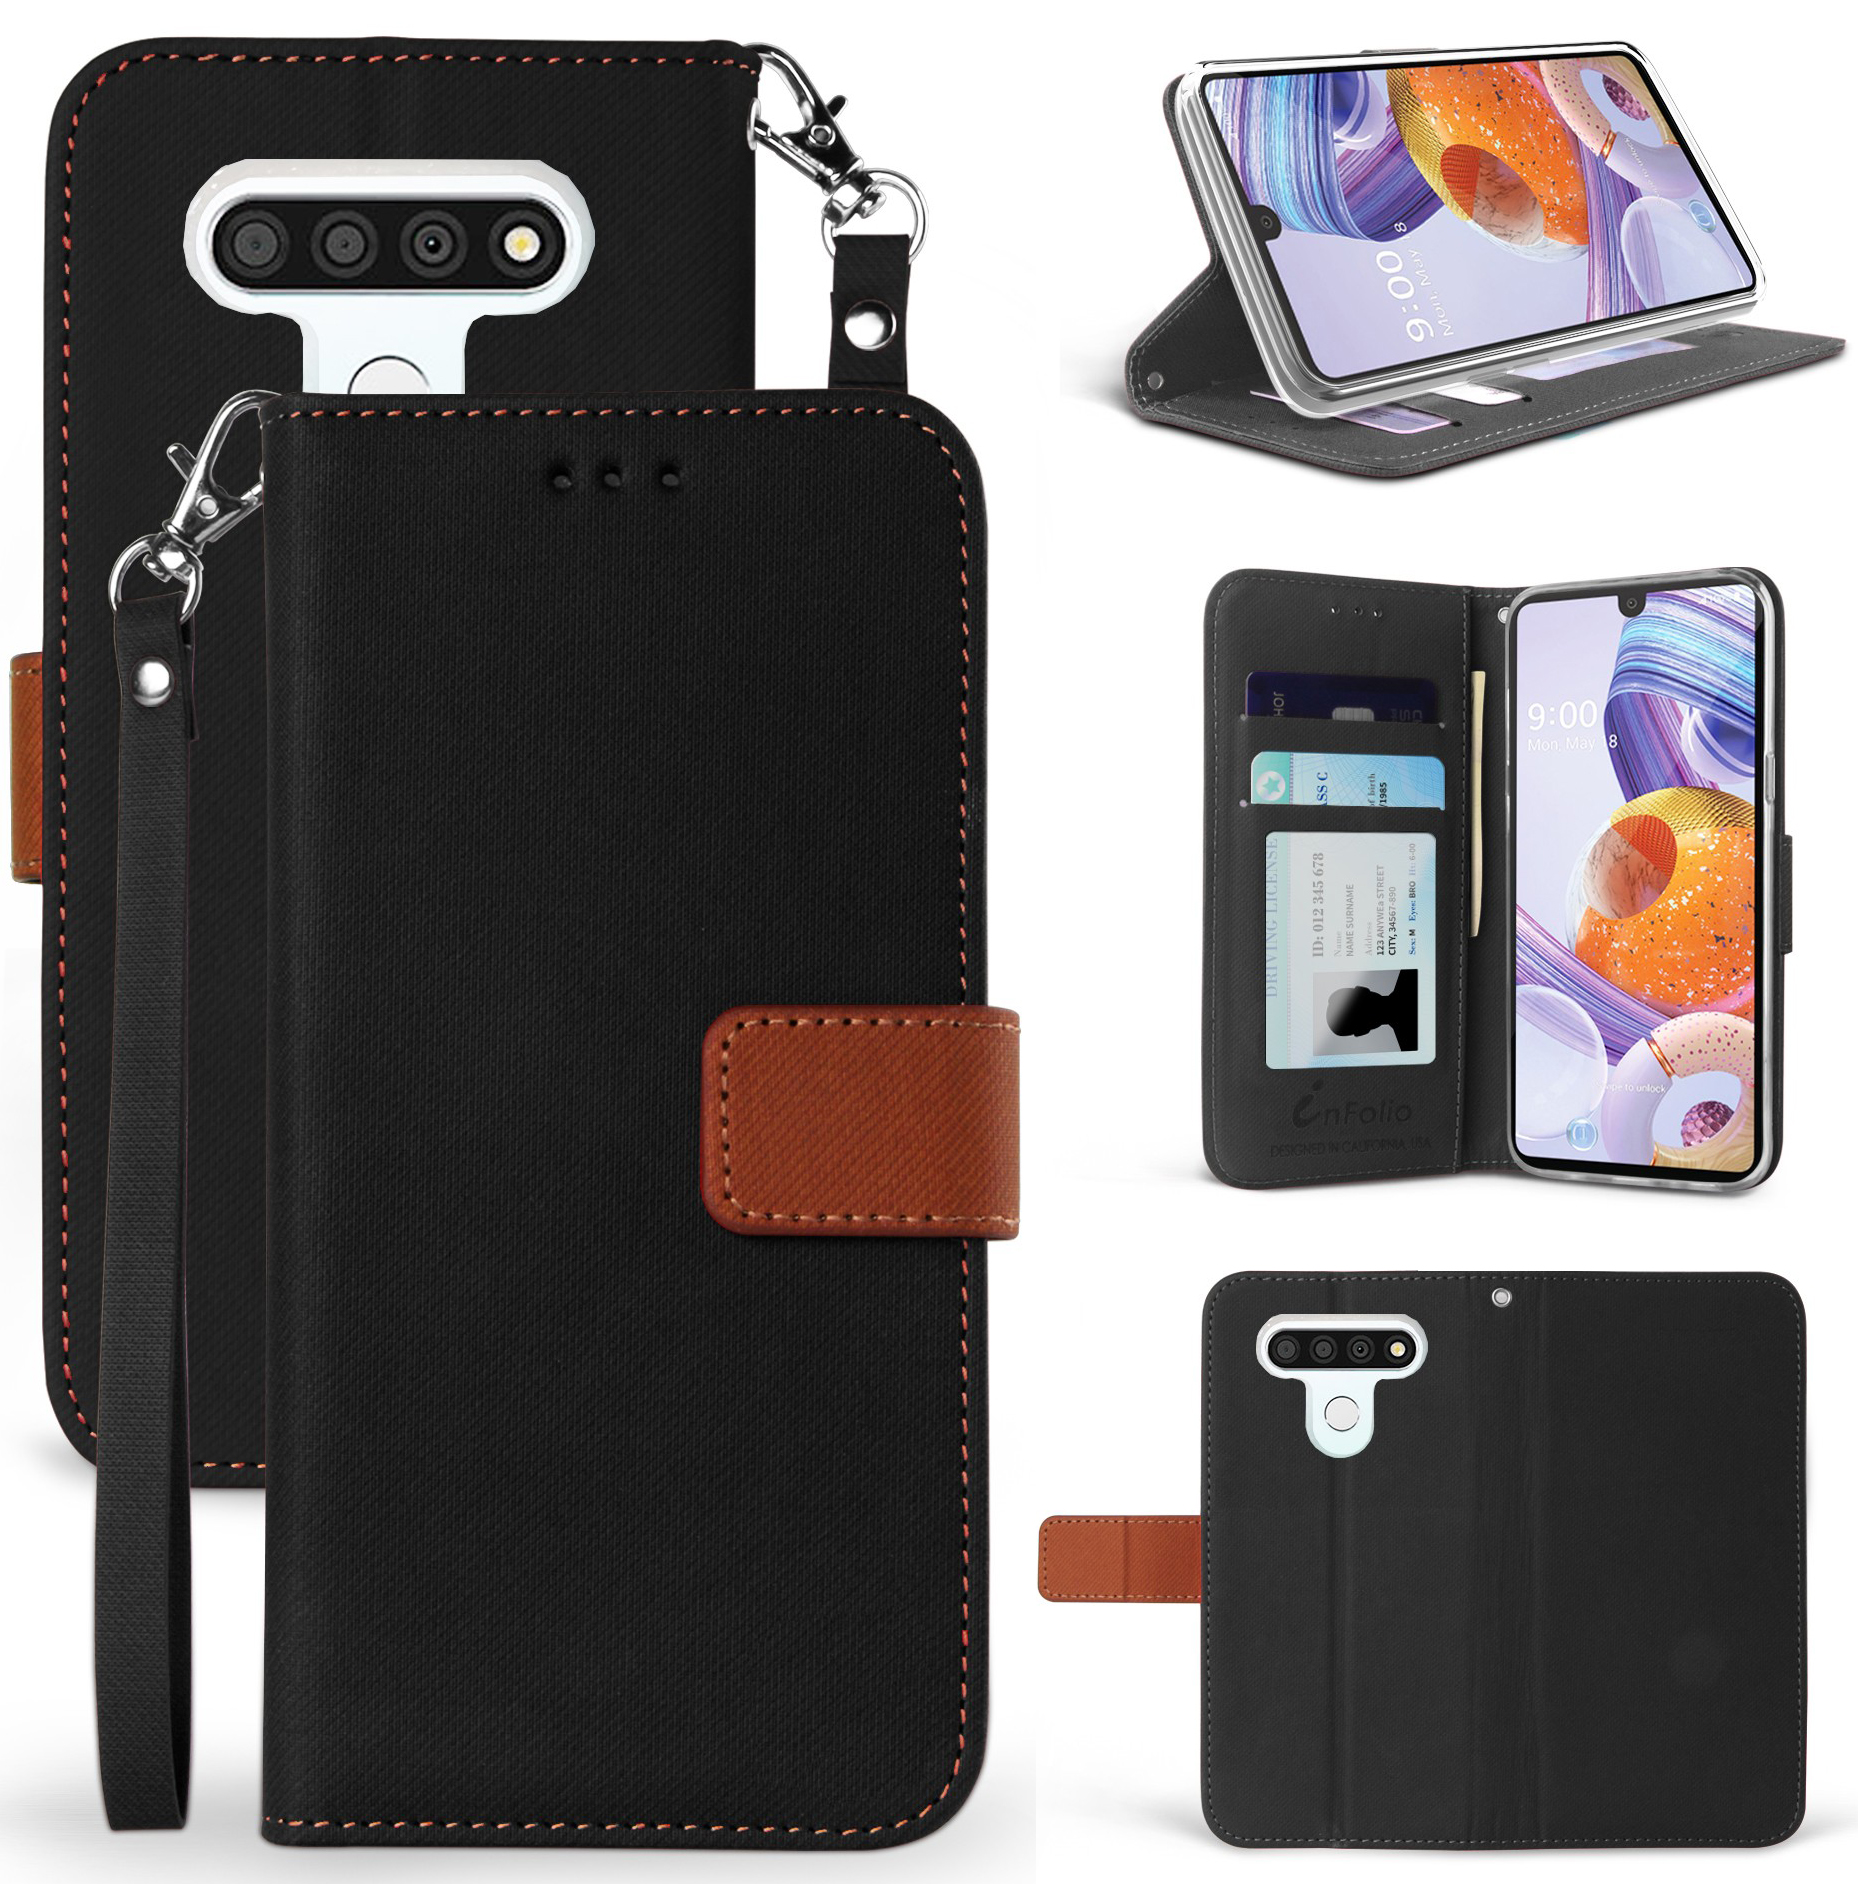 Nakedcellphone Durable Wallet Case Credit Card Slot Cover Stand Wrist Strap for LG K51, Reflect